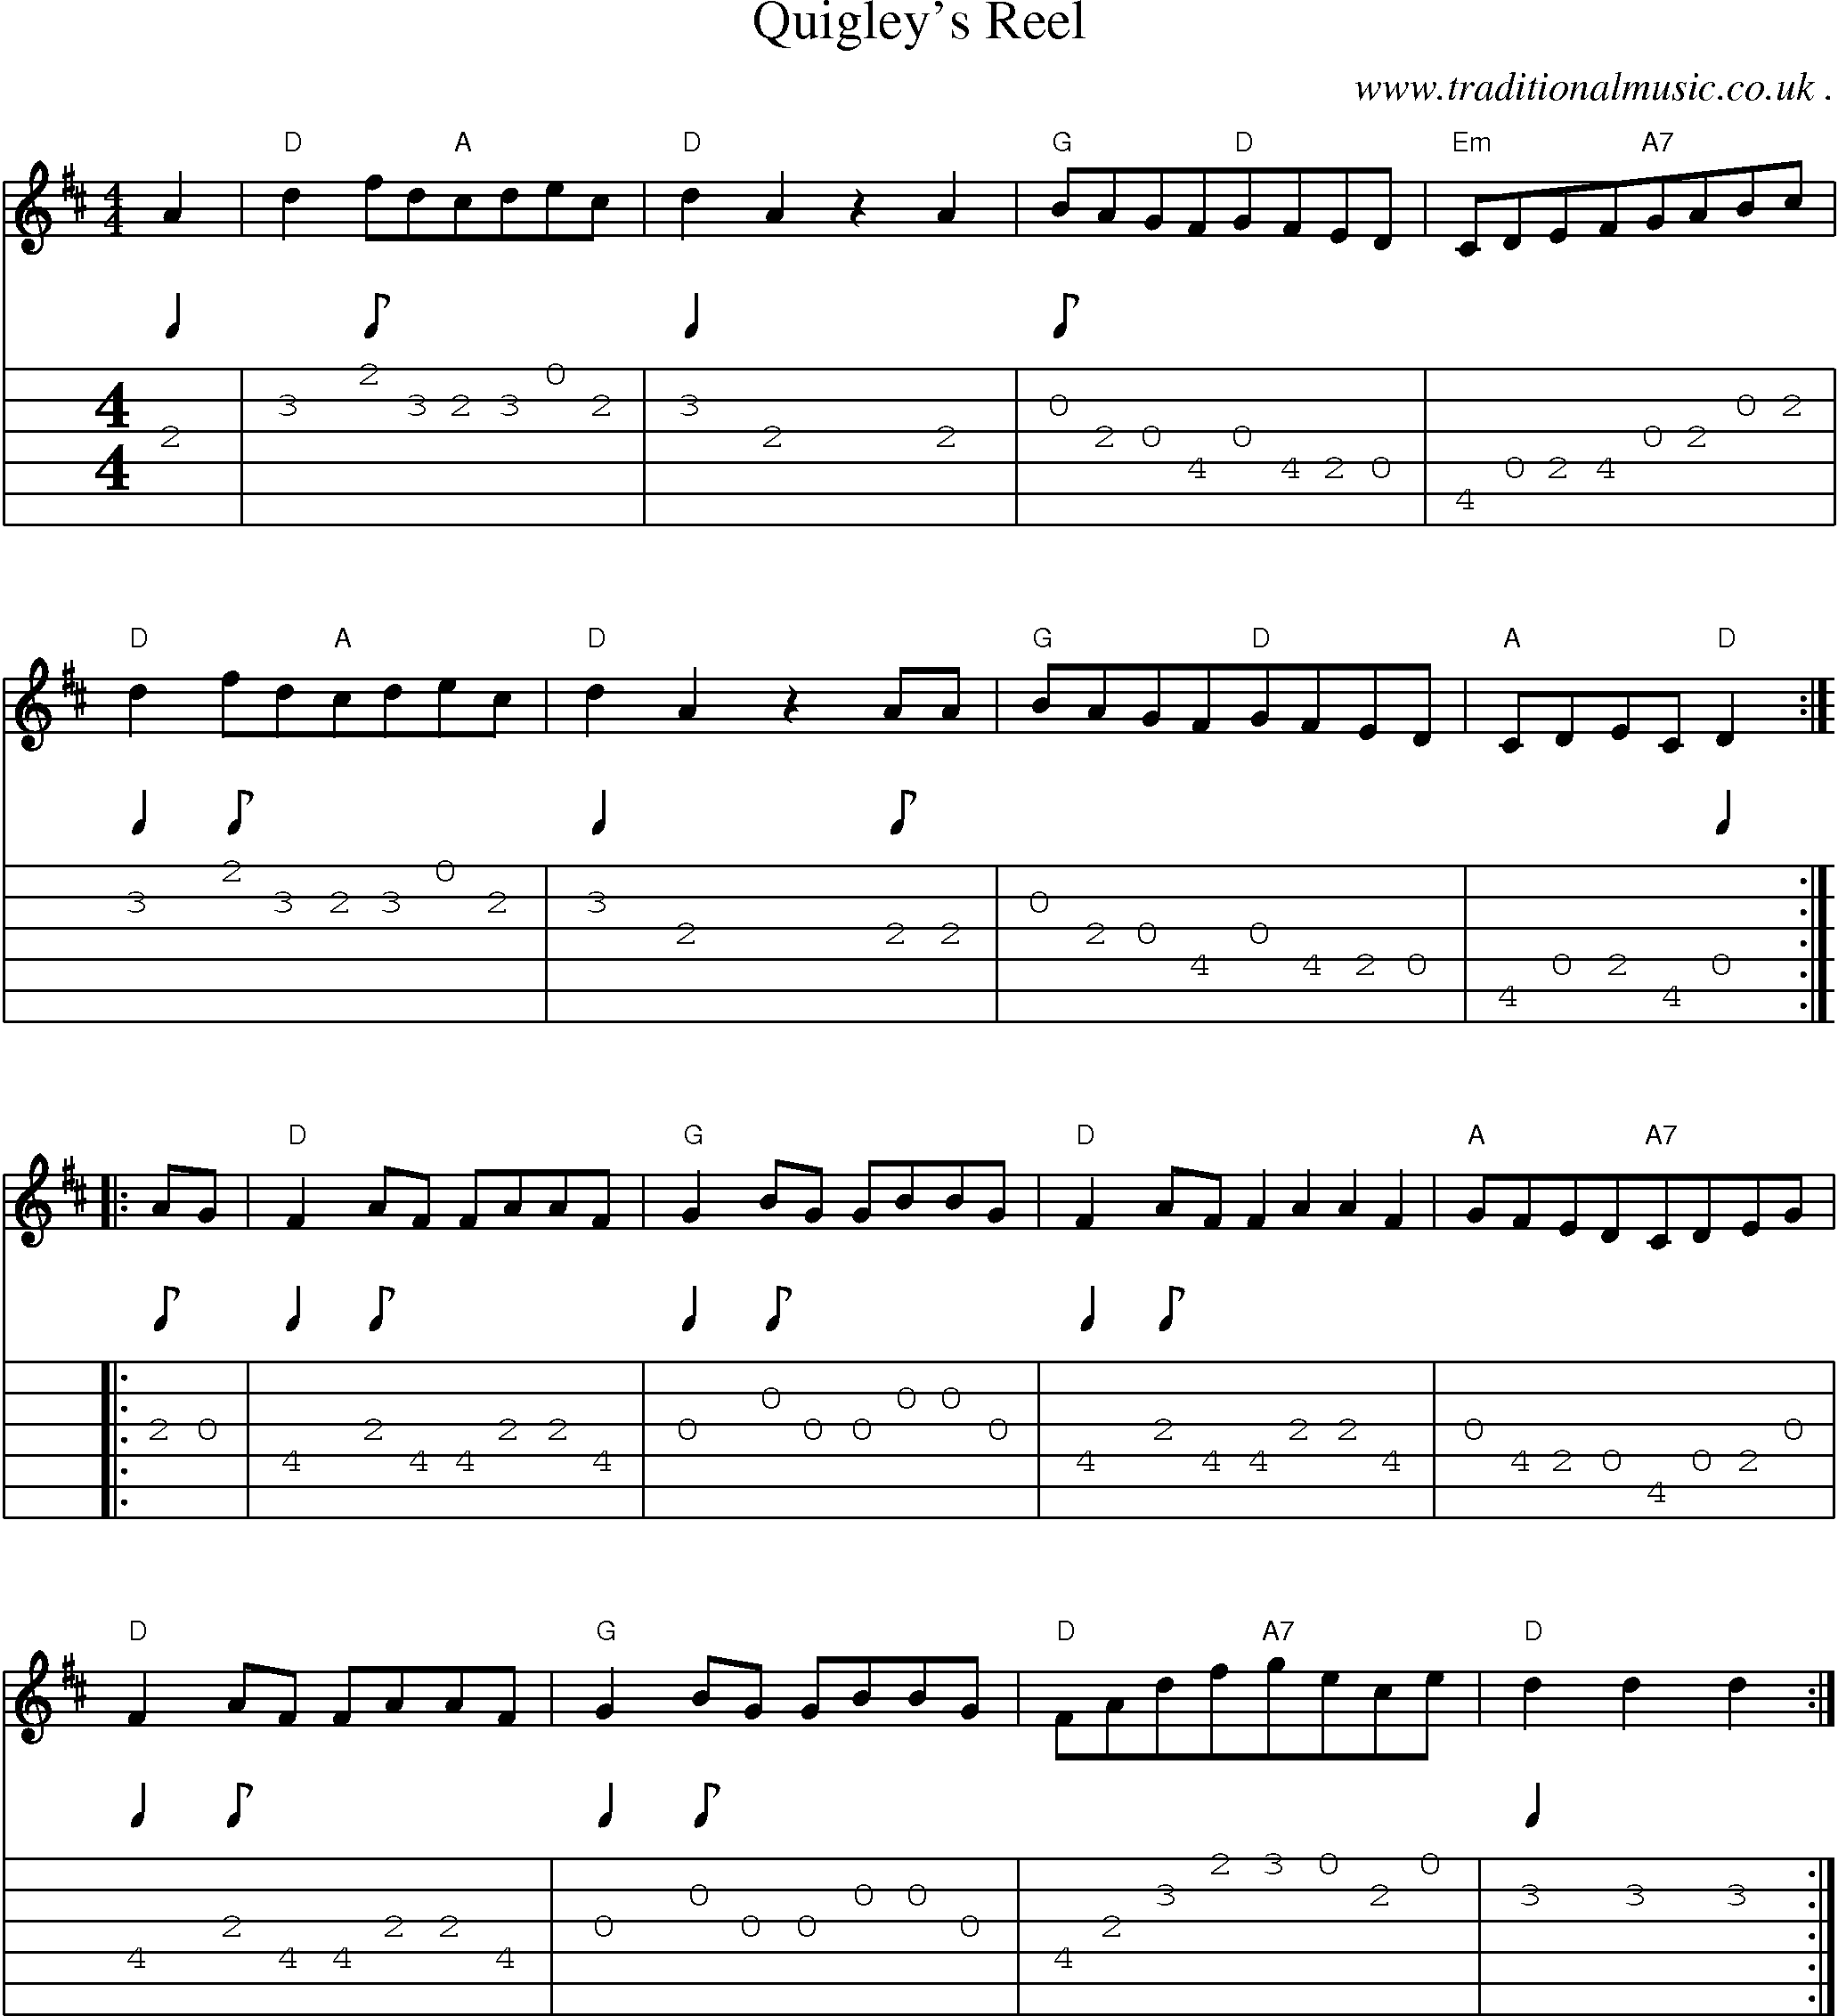 Sheet-Music and Guitar Tabs for Quigleys Reel